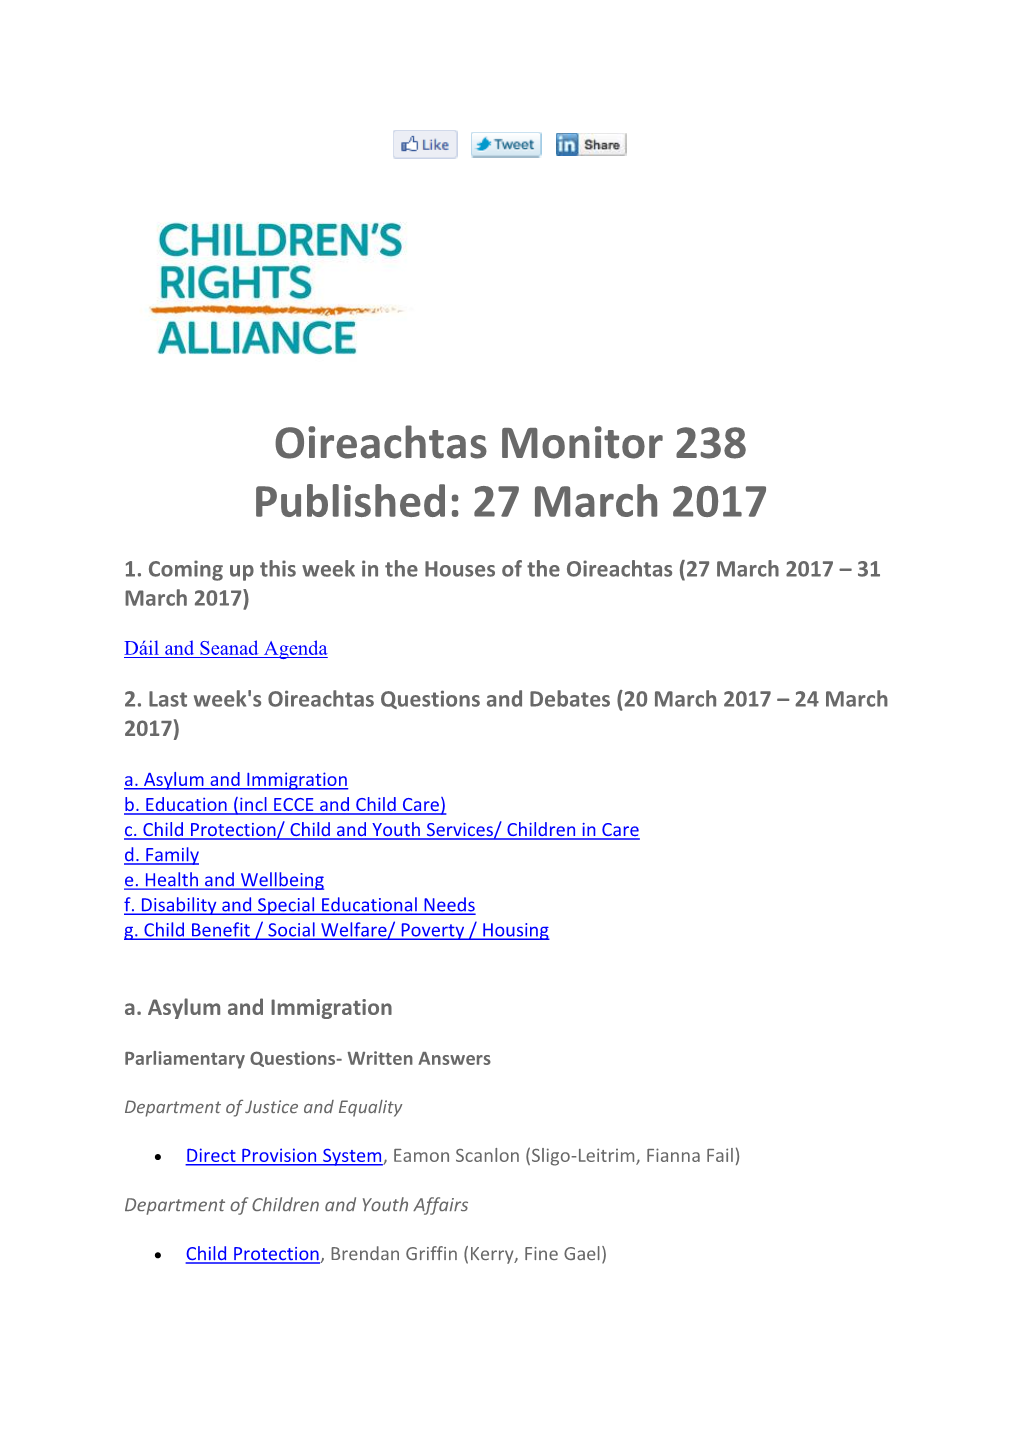 Oireachtas Monitor 238 Published